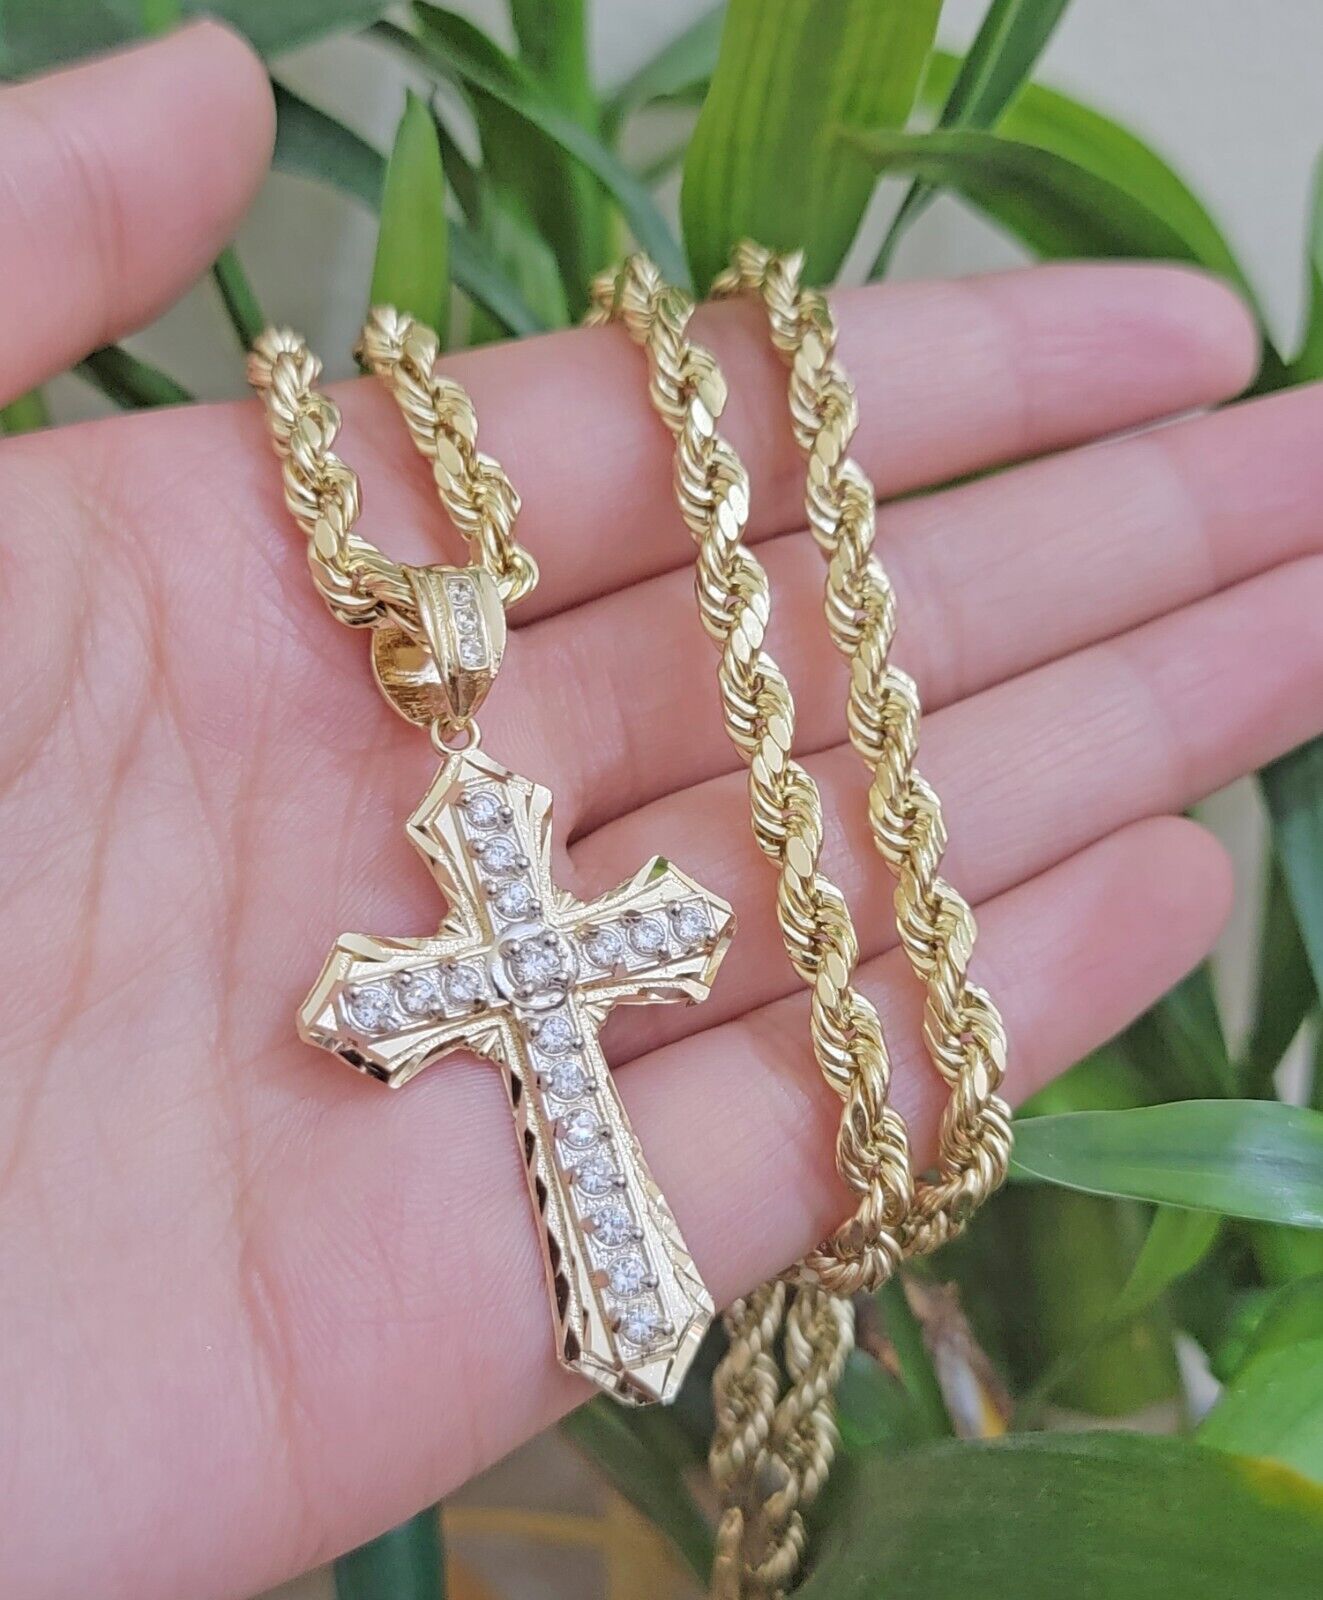 10k Gold Rope Chain Necklace Cross Charm Pendant Set 18-28" inch 5mm, REAL 14kt